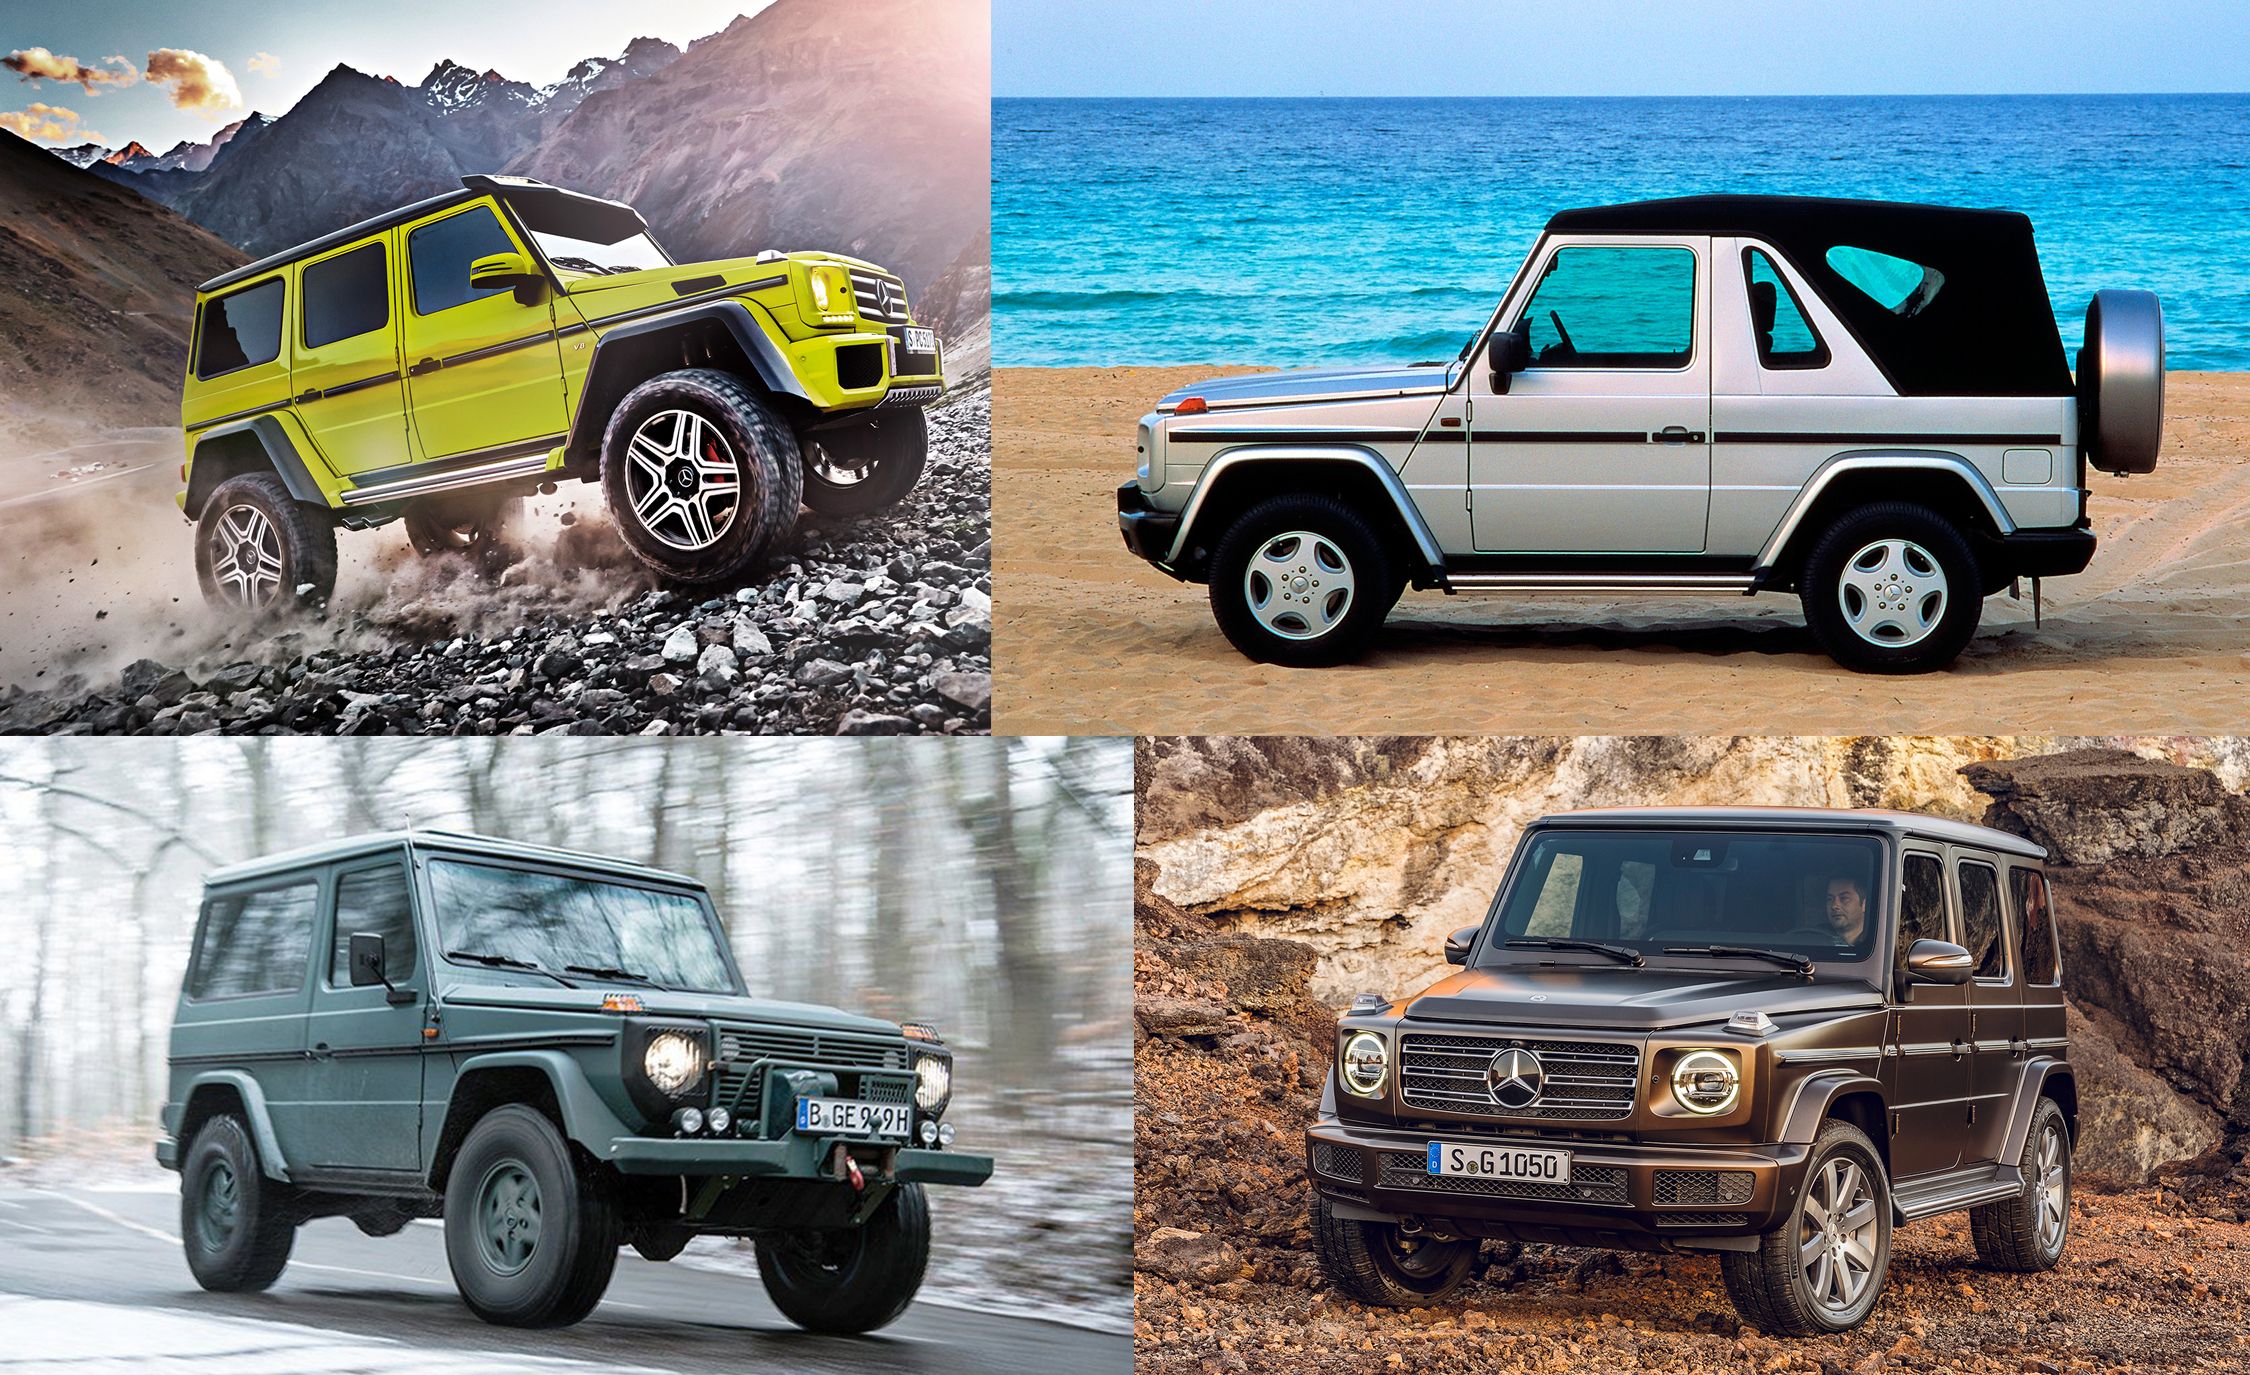 Visual History of the Mercedes-Benz G-wagen: From Brute to Bourgeois